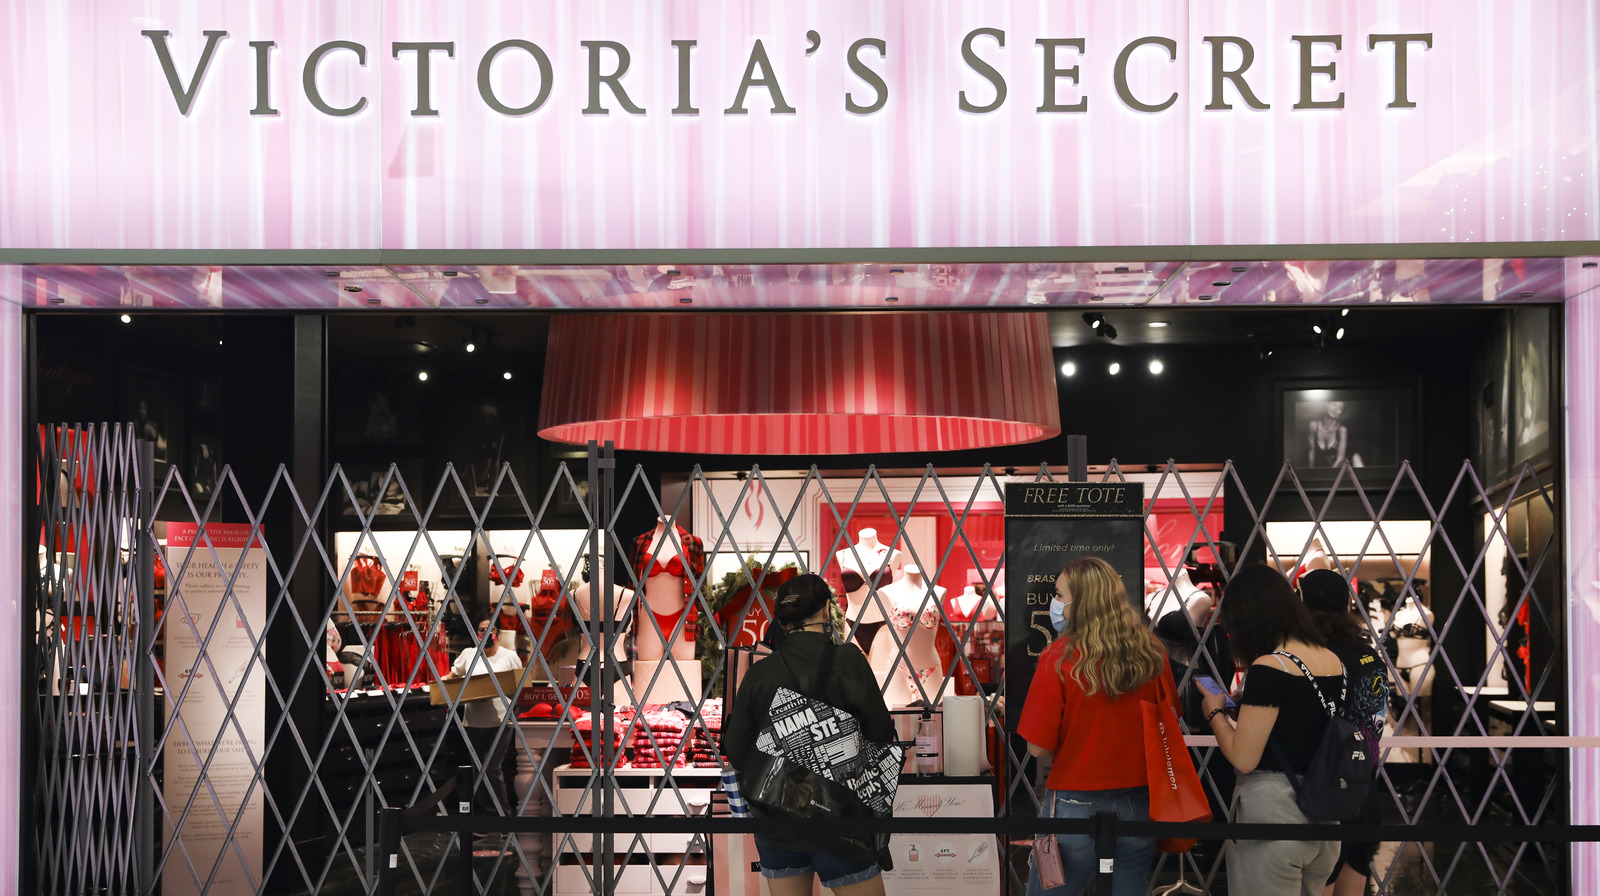 Why You Should Think Twice About Buying Victoria's Secret